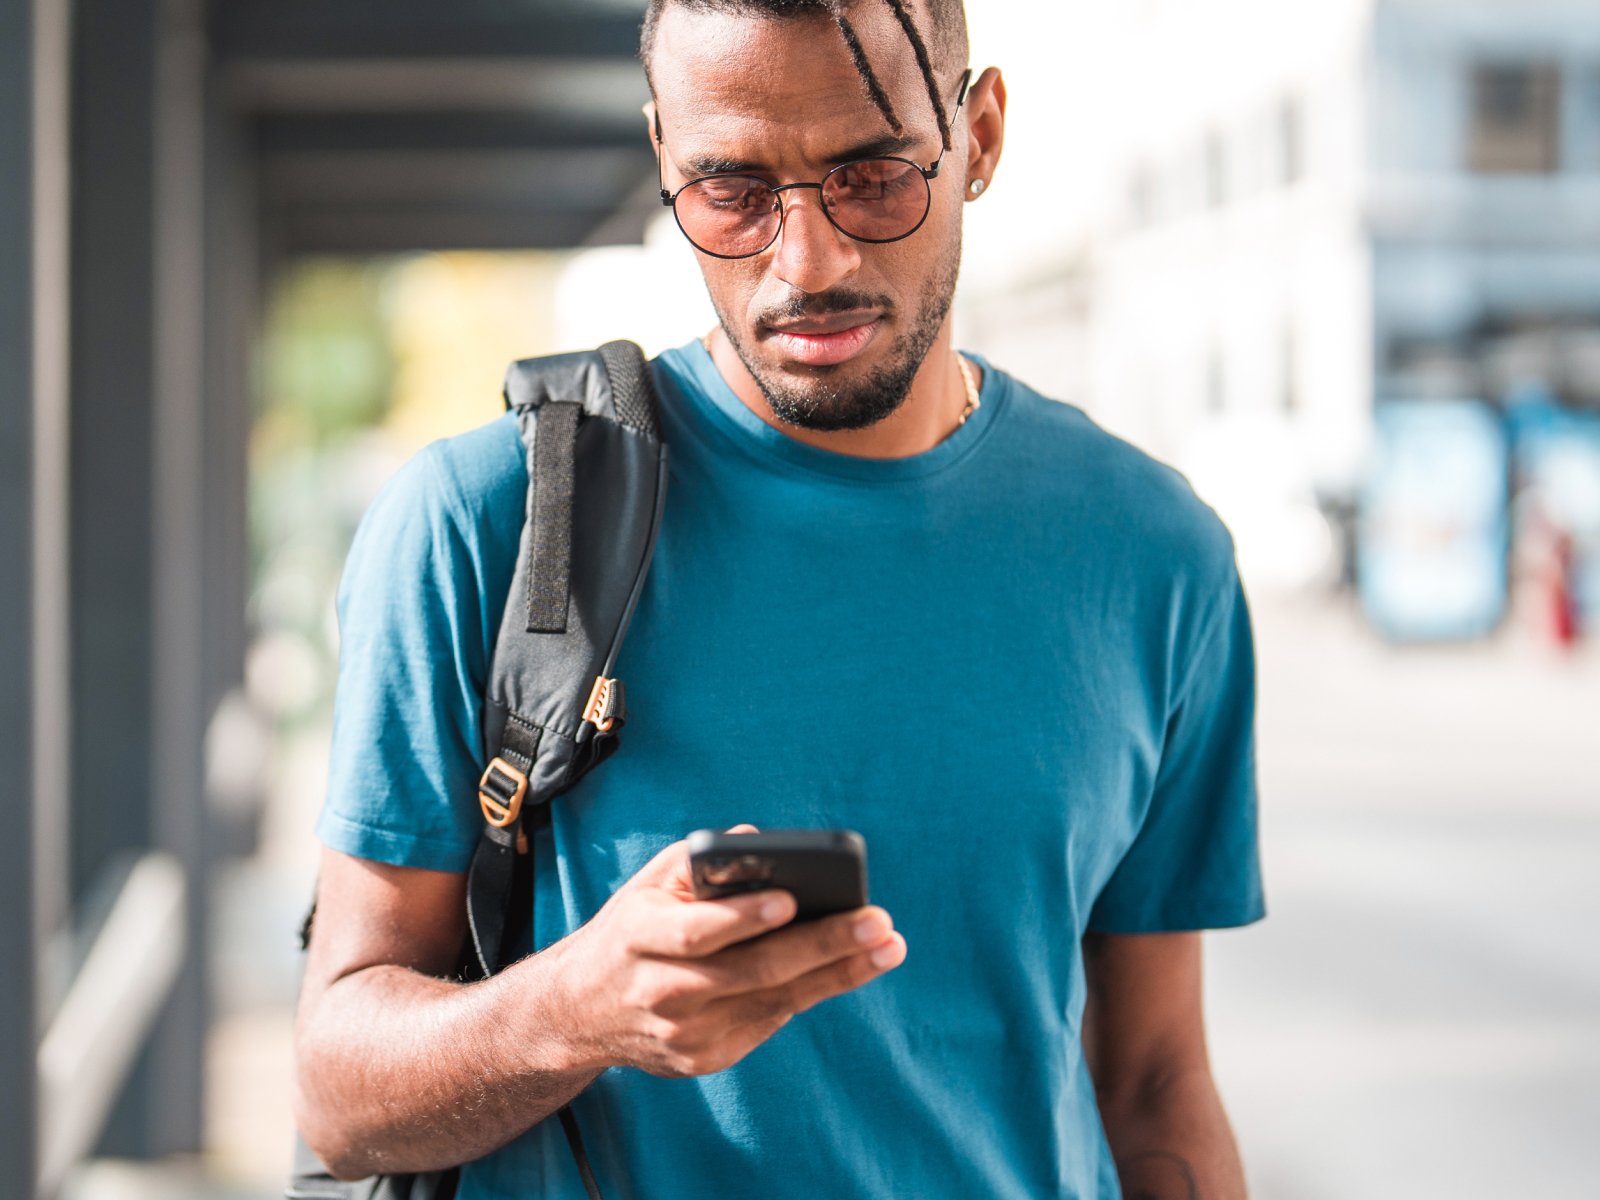 man with phone in his hand